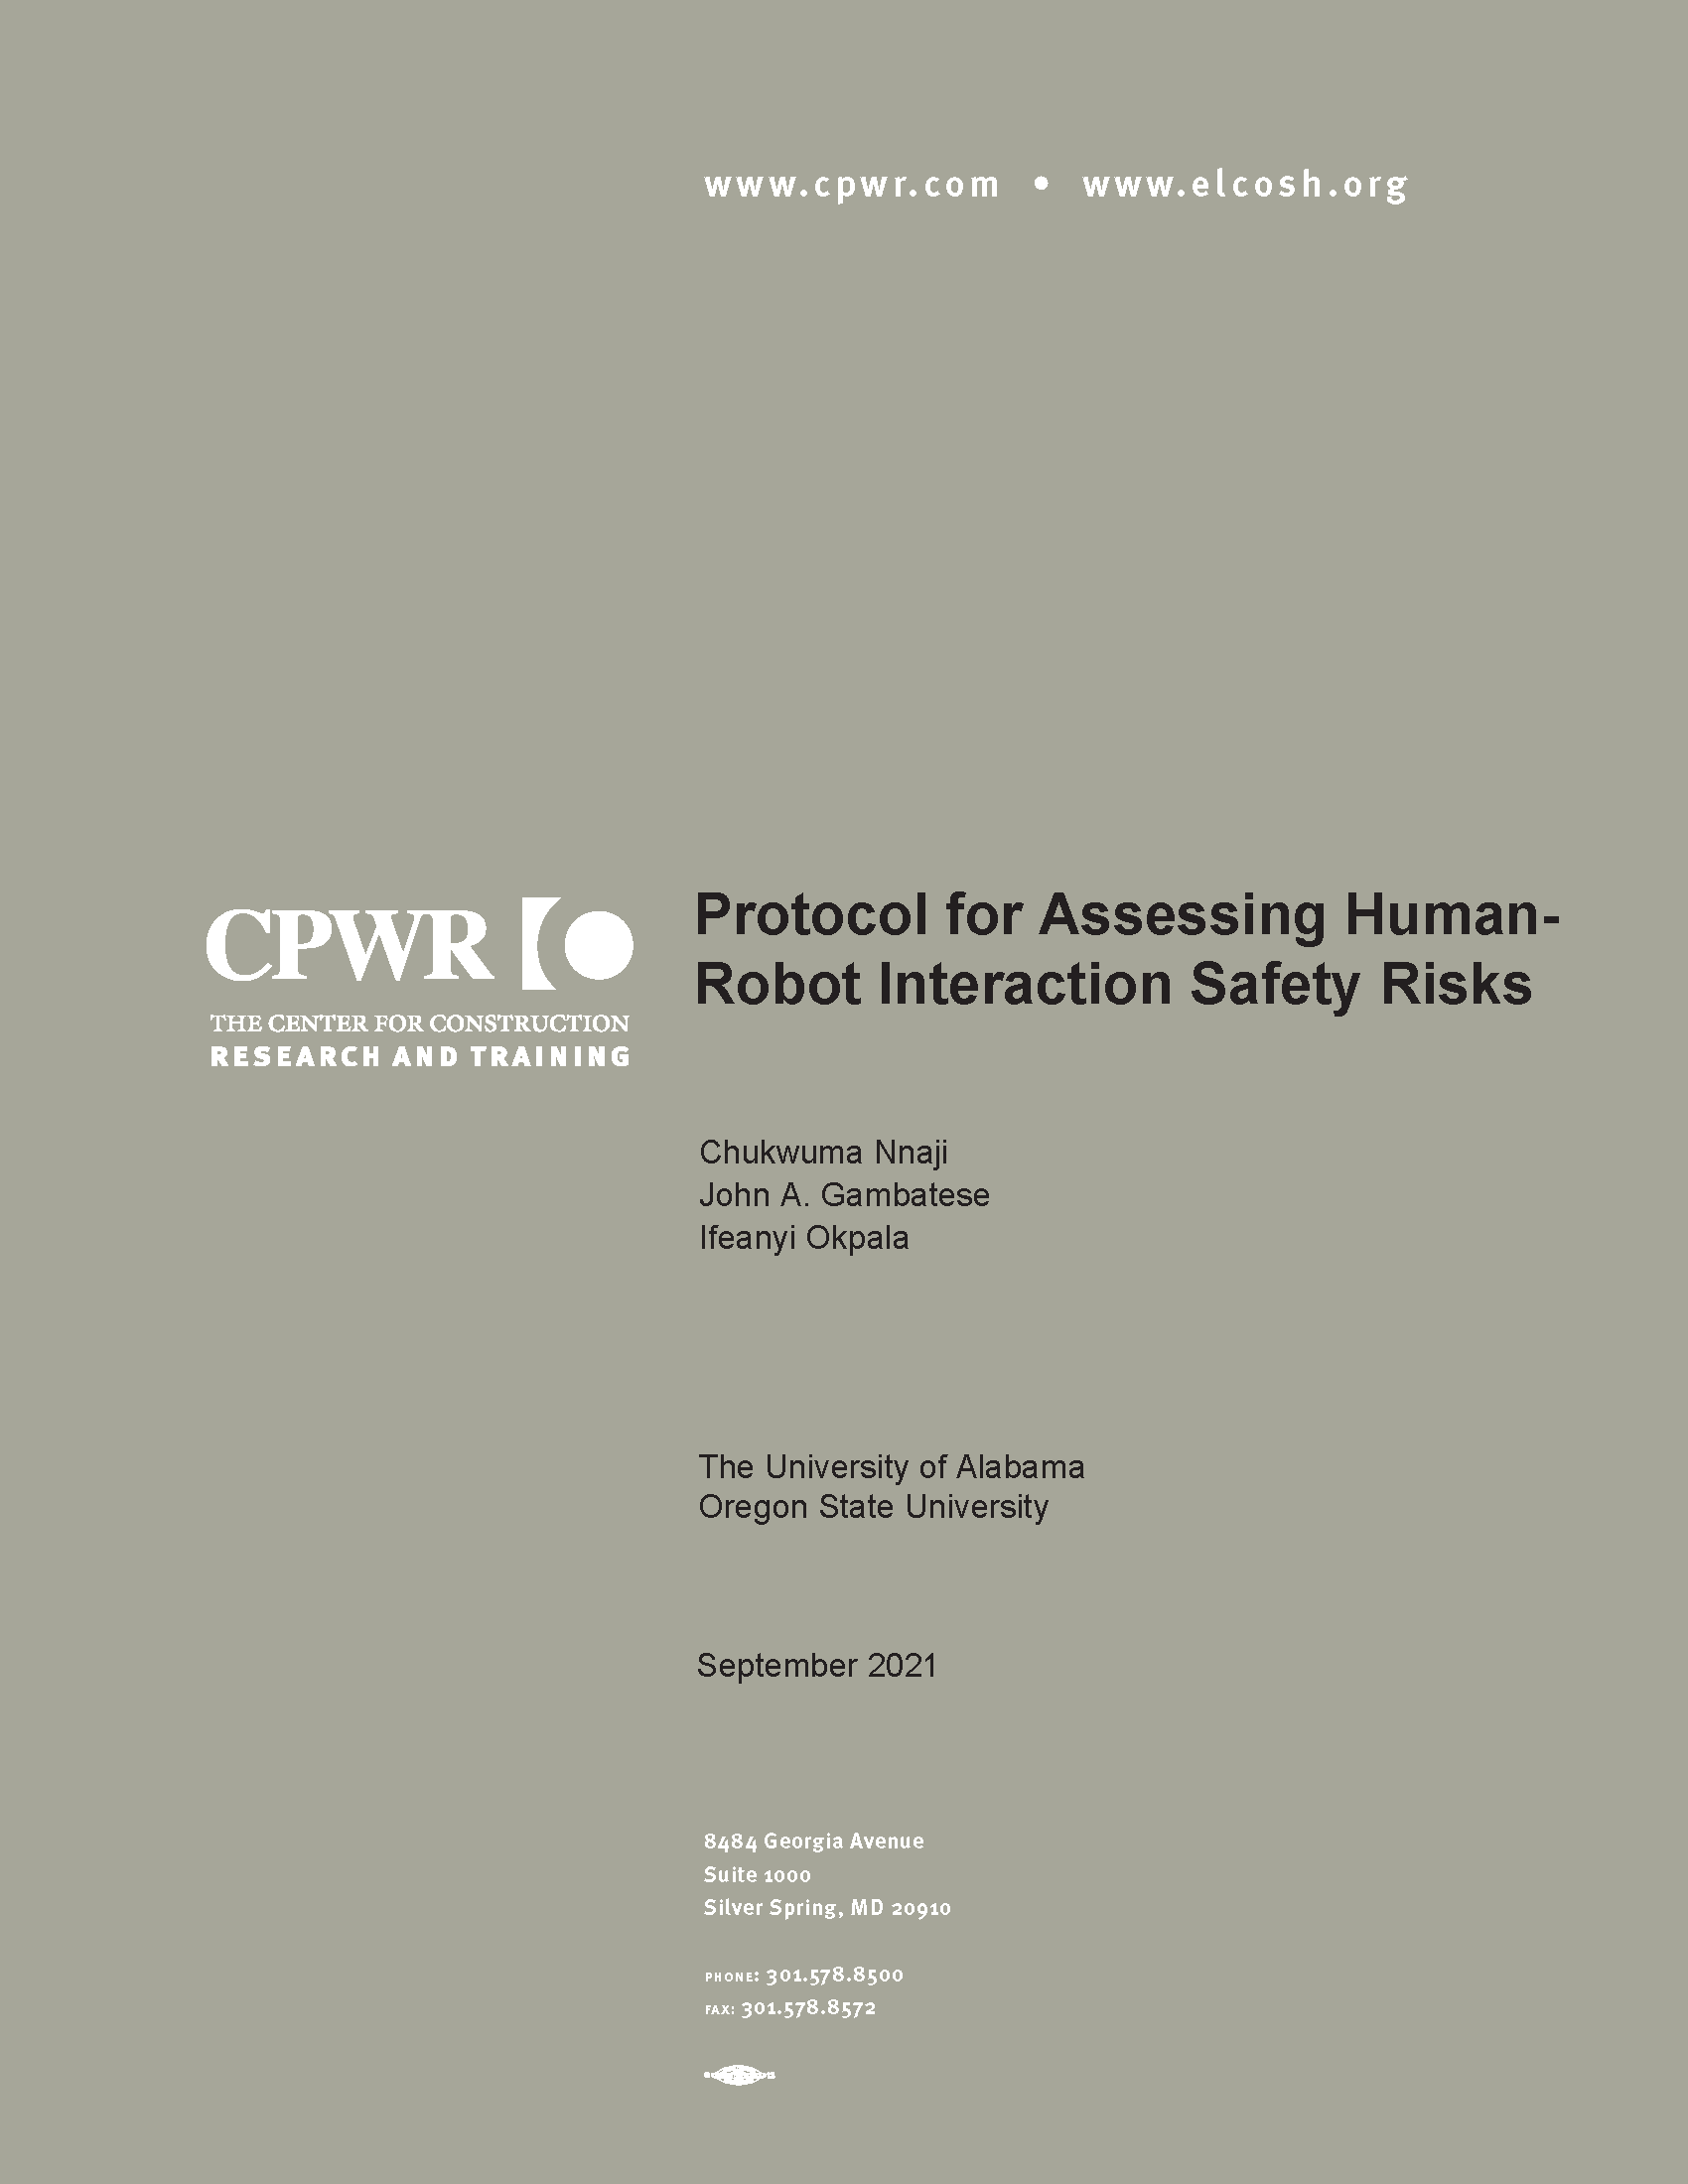 Protocol for Assessing Human- Robot Interaction Safety Risks report cover with author, university, and date.